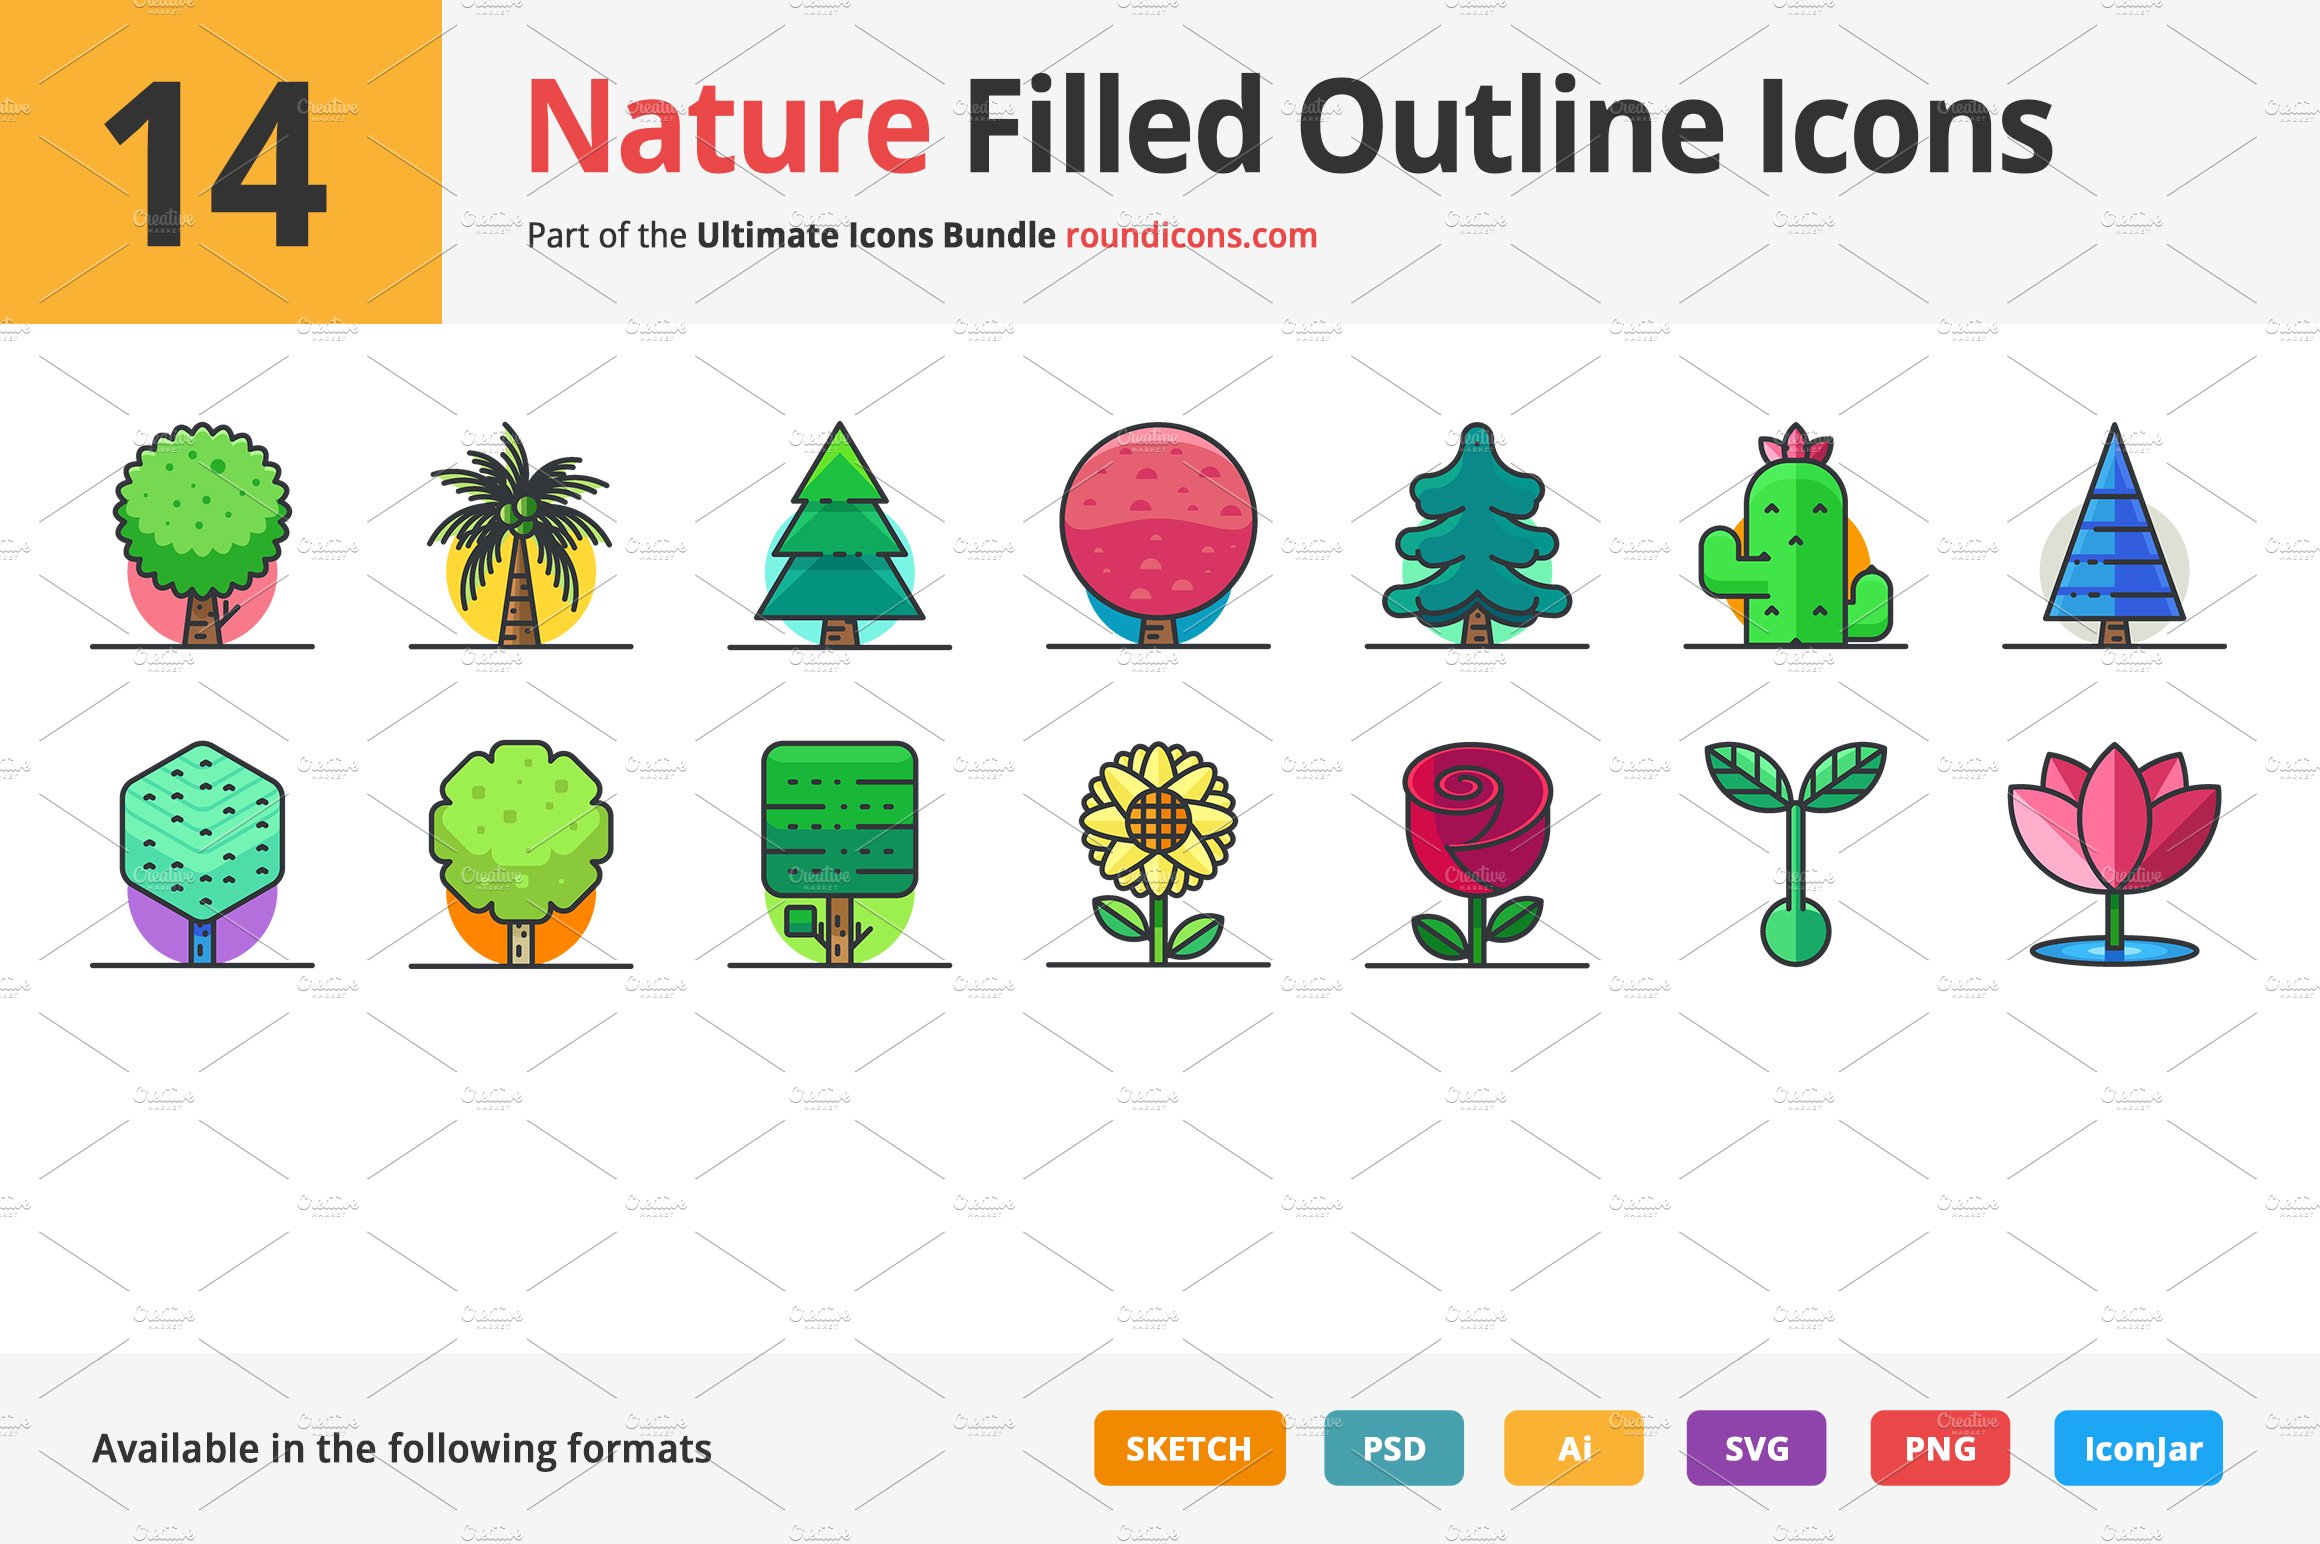 14 Nature Filled Outline Icons cover image.